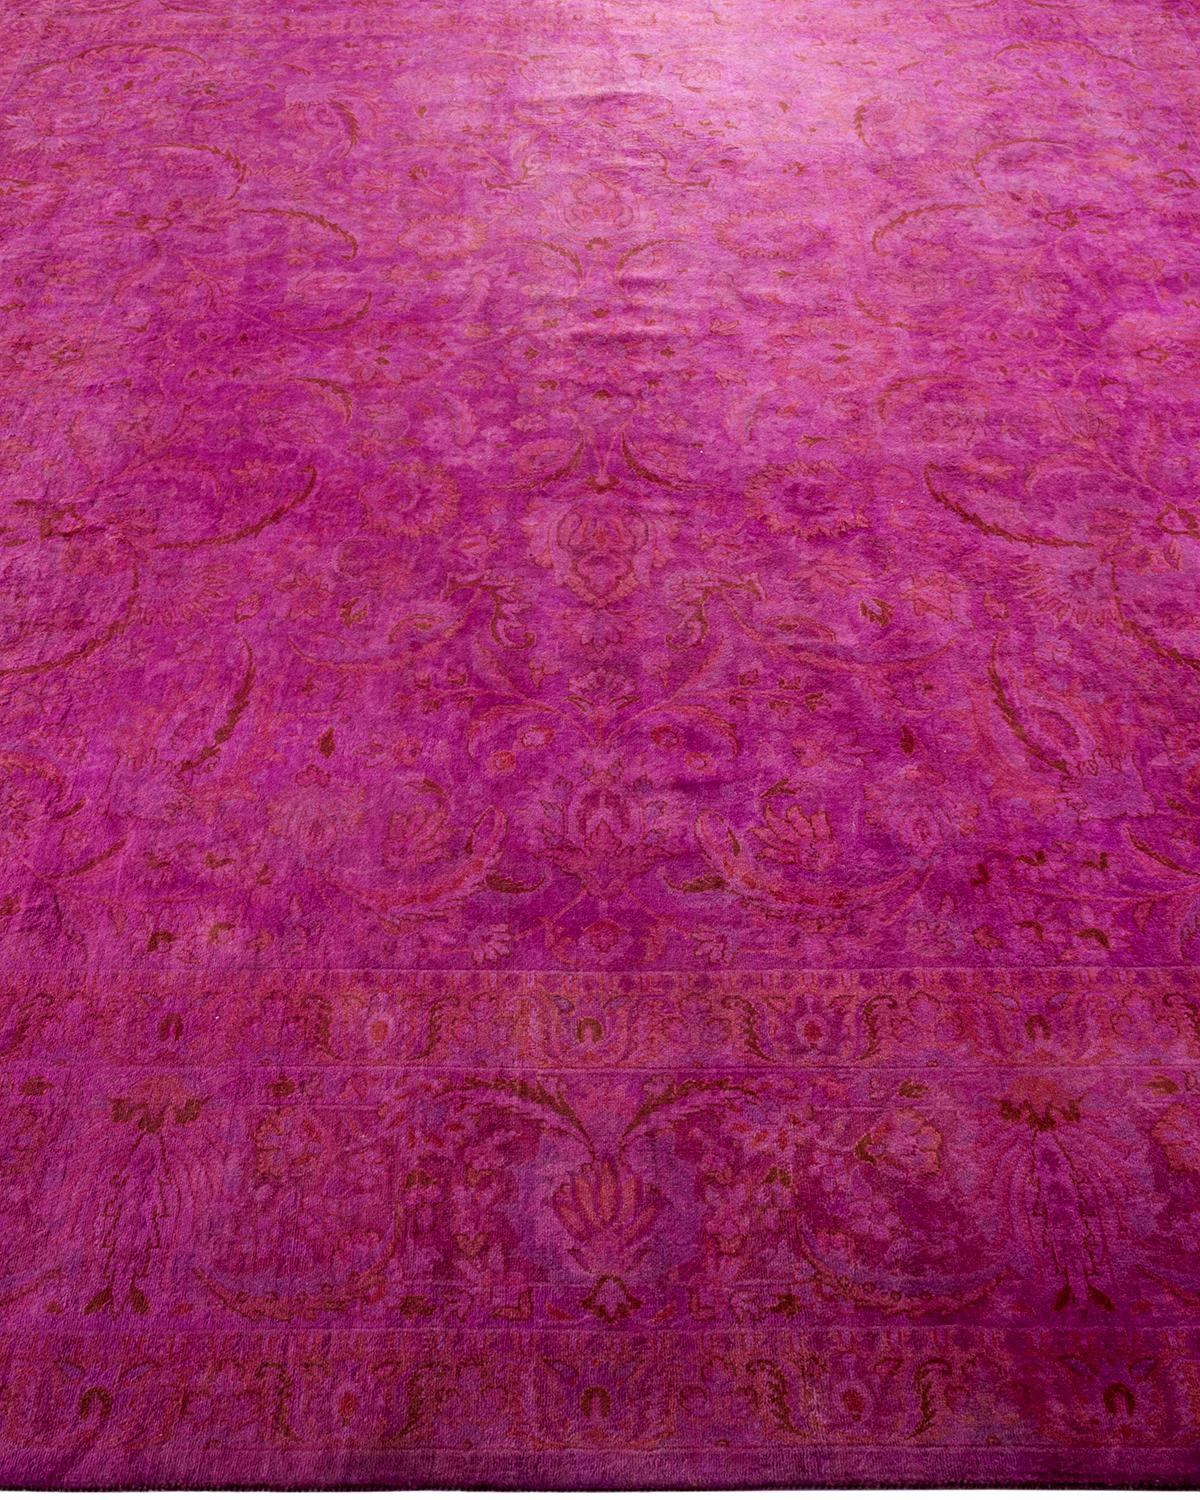 Pakistani Overdyed Hand Knotted Wool Pink Area Rug For Sale